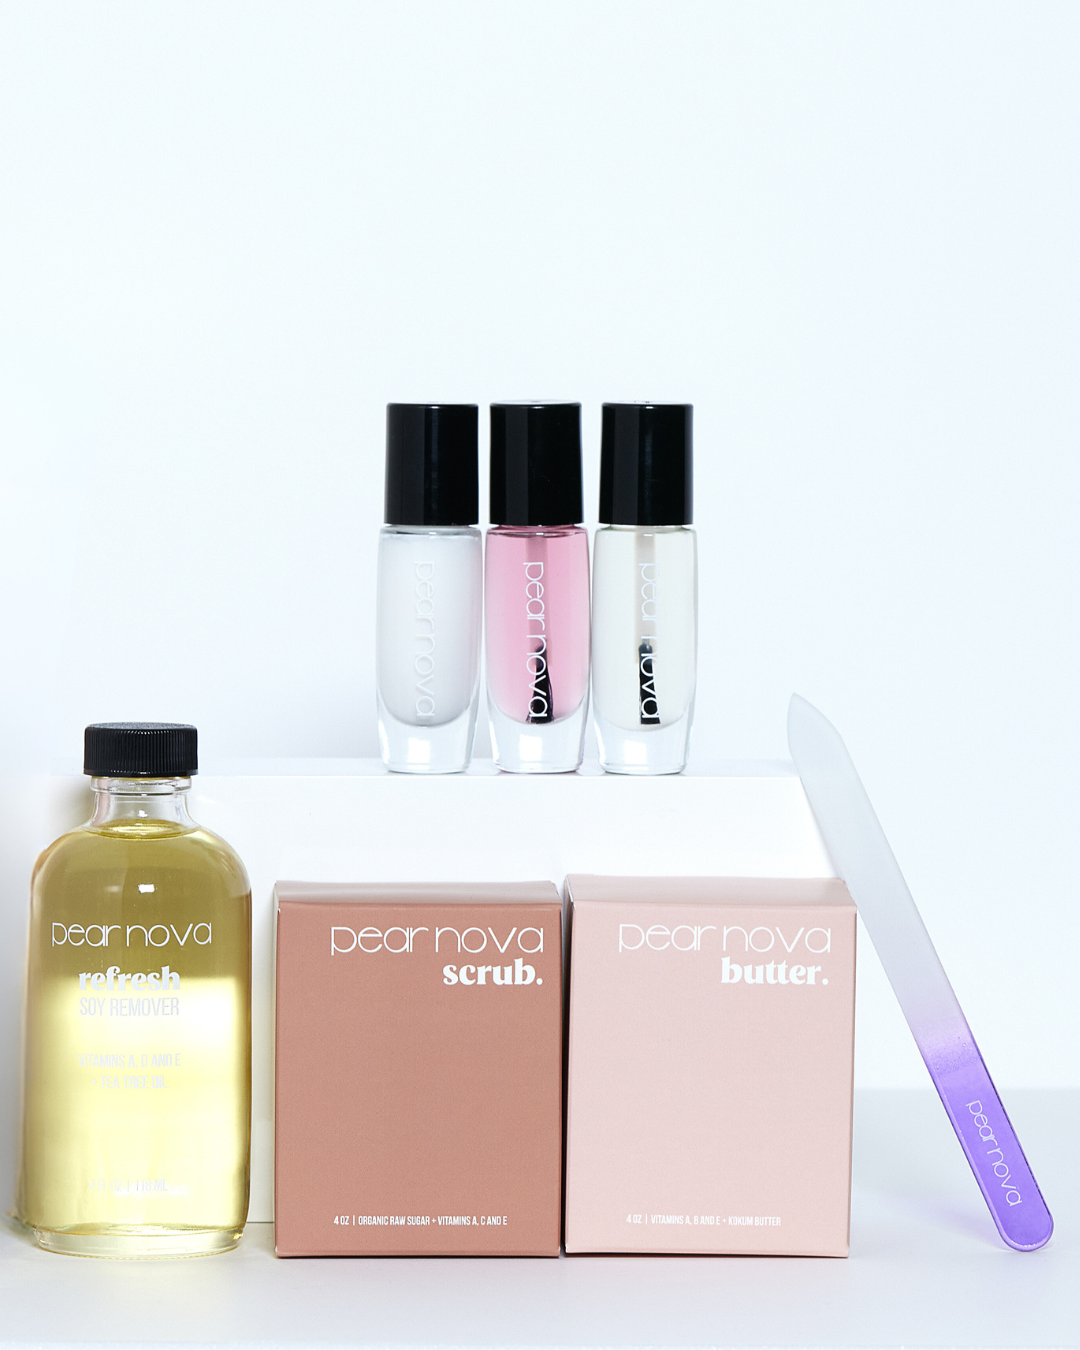 product image of luxe nail care set showing all items included in set